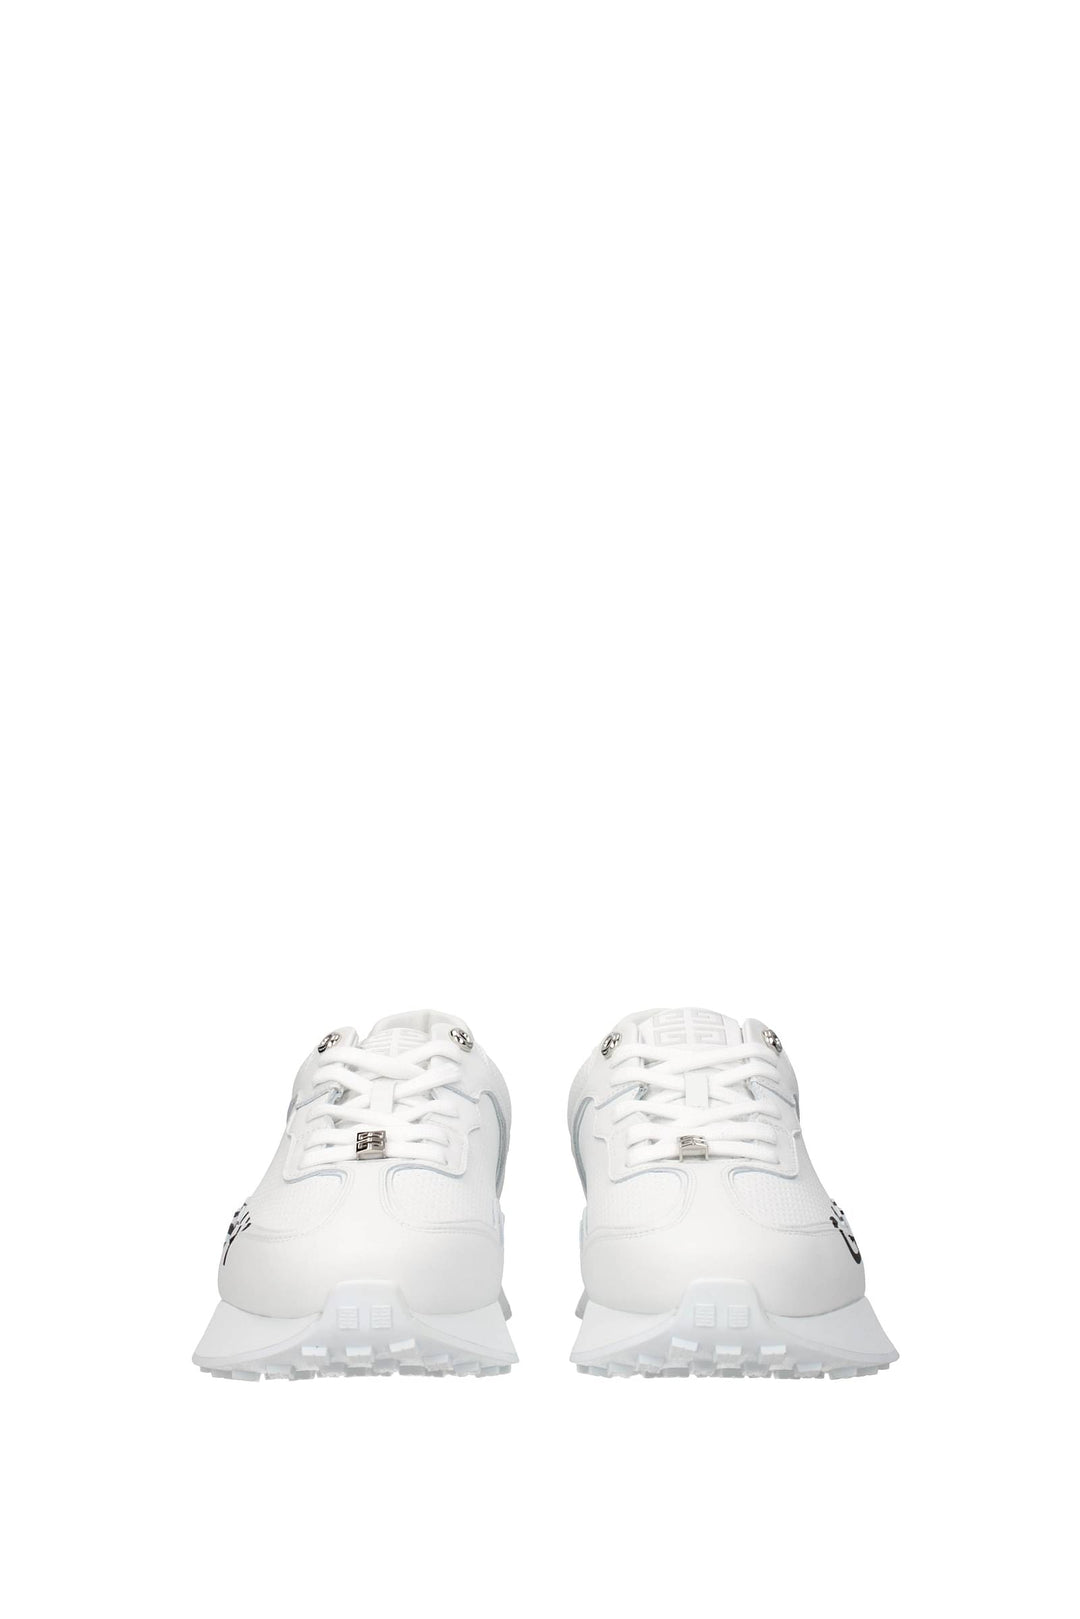 Sneakers Pelle Bianco - Givenchy - Uomo